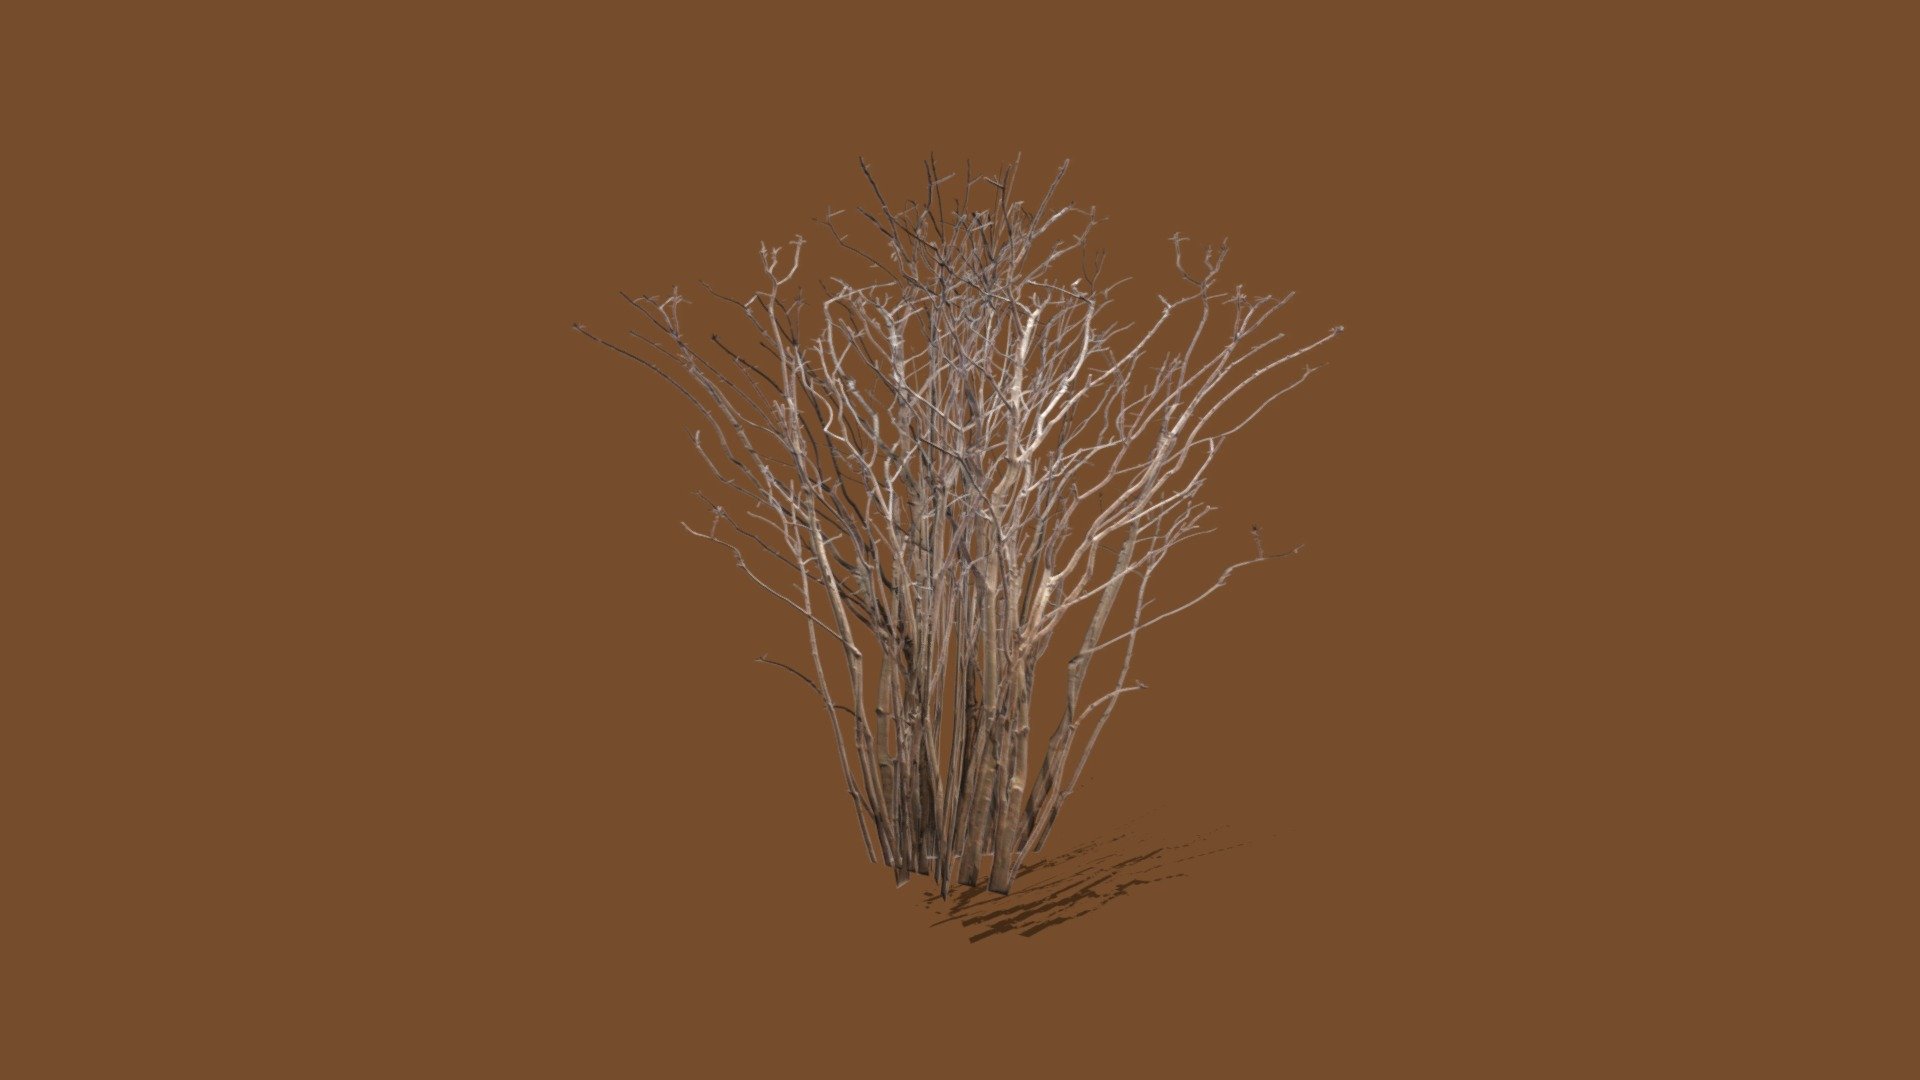 Low-poly Bush without leaves. Created with 3Ds max2018. Export in FBX. Model have diffuse, opacity, normal texture maps - Bush without leaves - 3D model by Ybreibyf 3d model